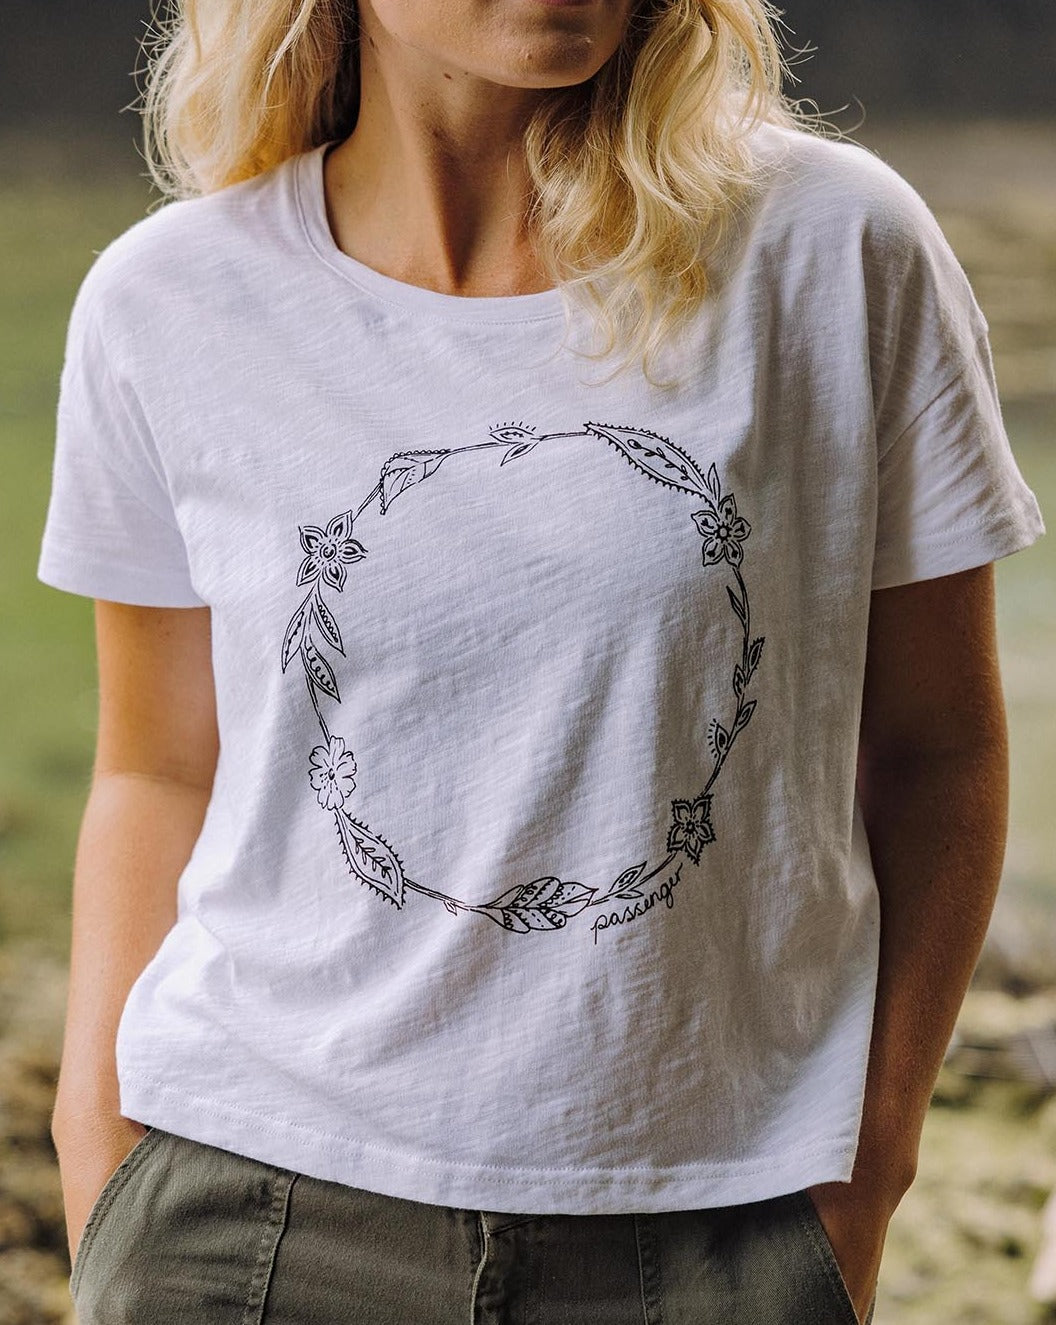 Daisy Chain Recycled Cotton T-Shirt - White